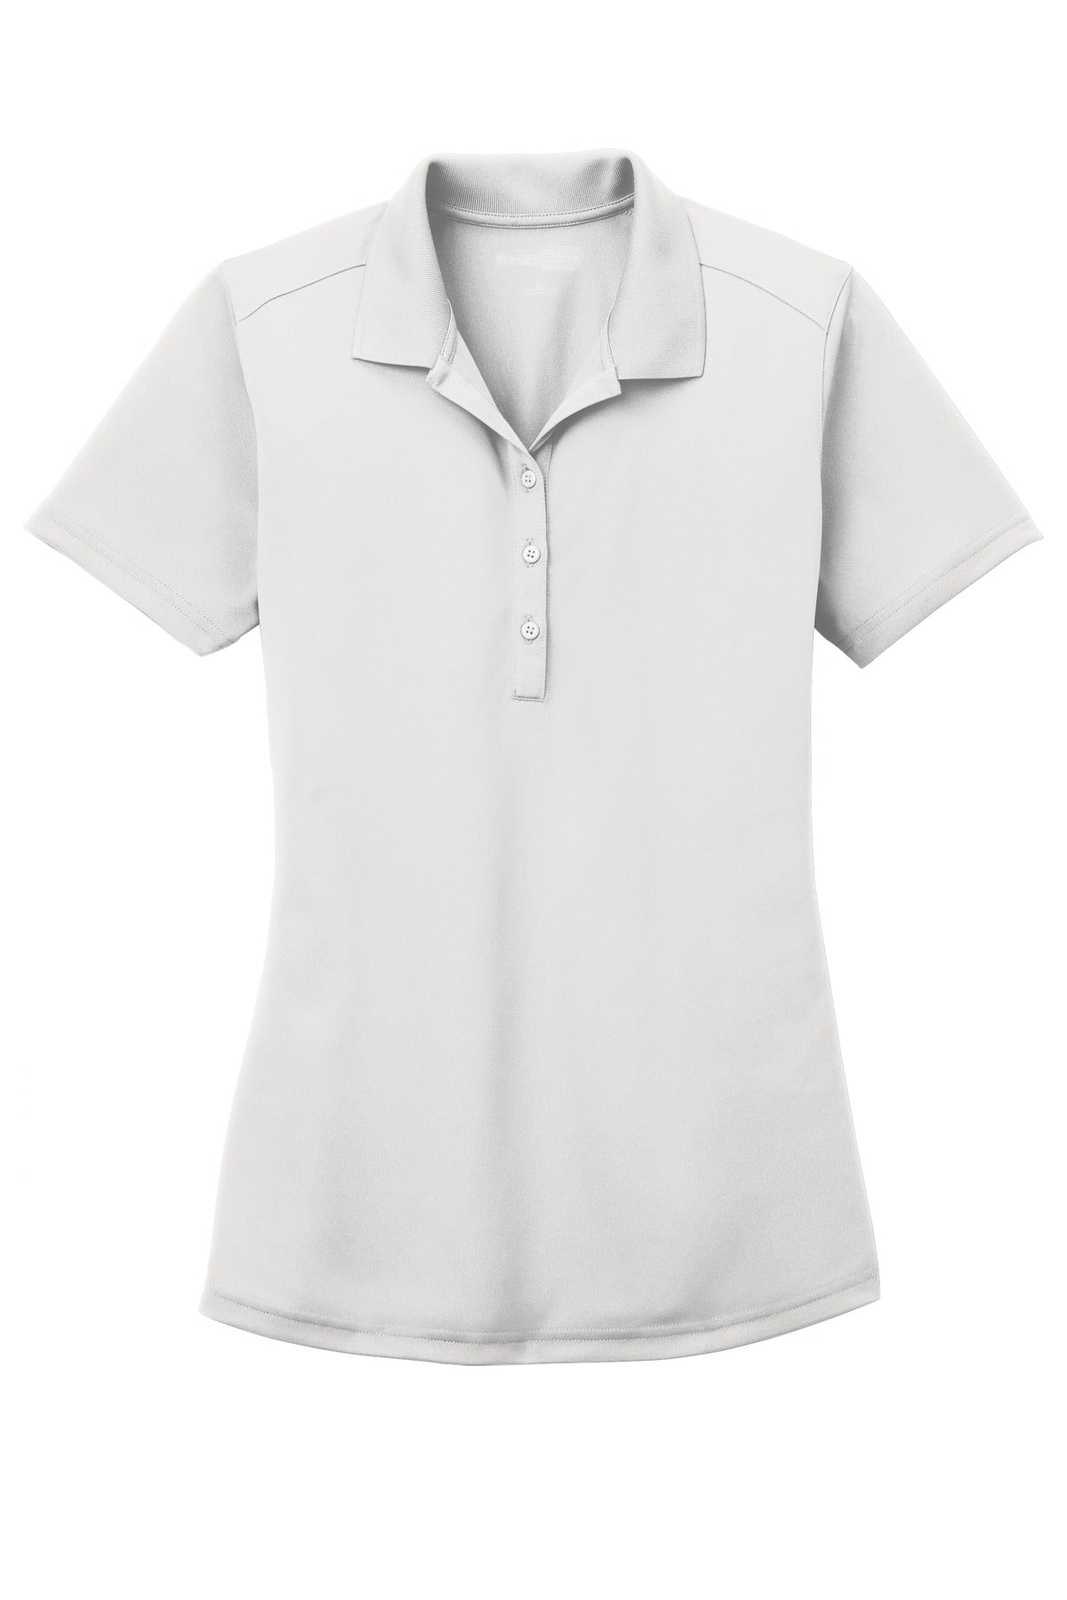 CornerStone CS419 Ladies Select Lightweight Snag-Proof Polo - White - HIT a Double - 5